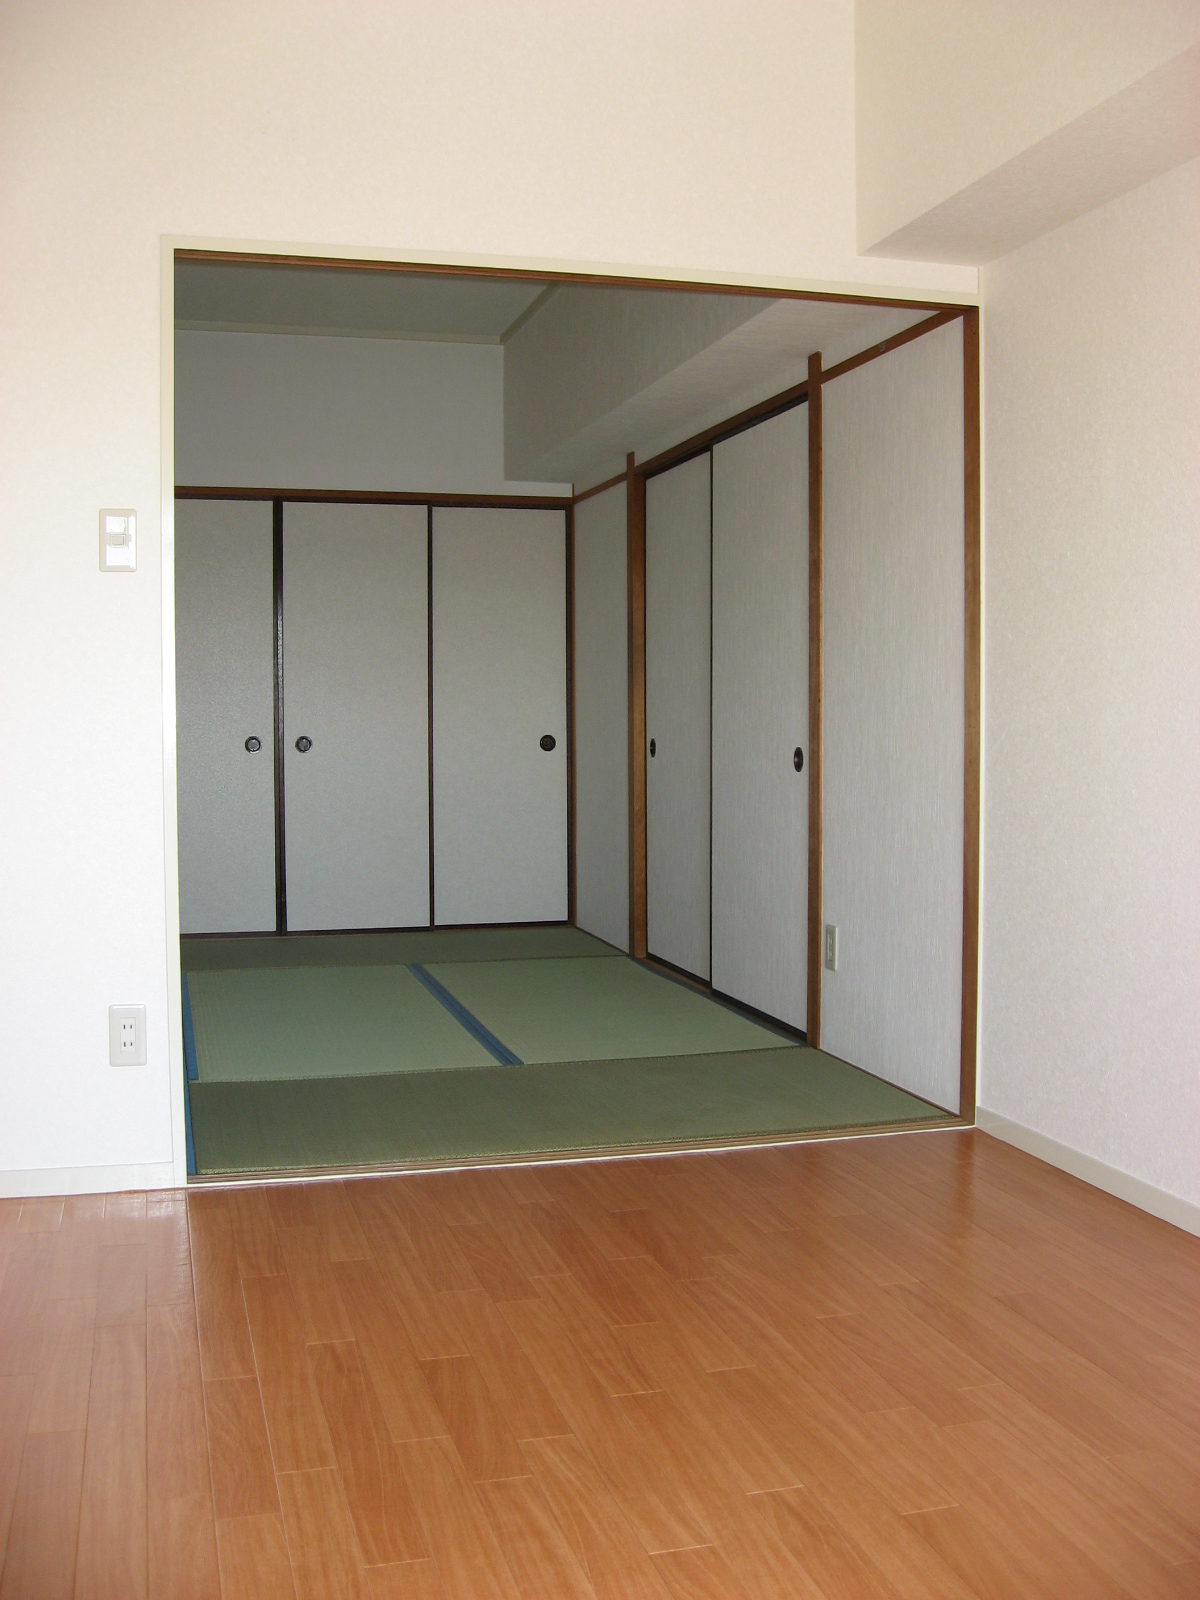 Other room space. There is Japanese-style room